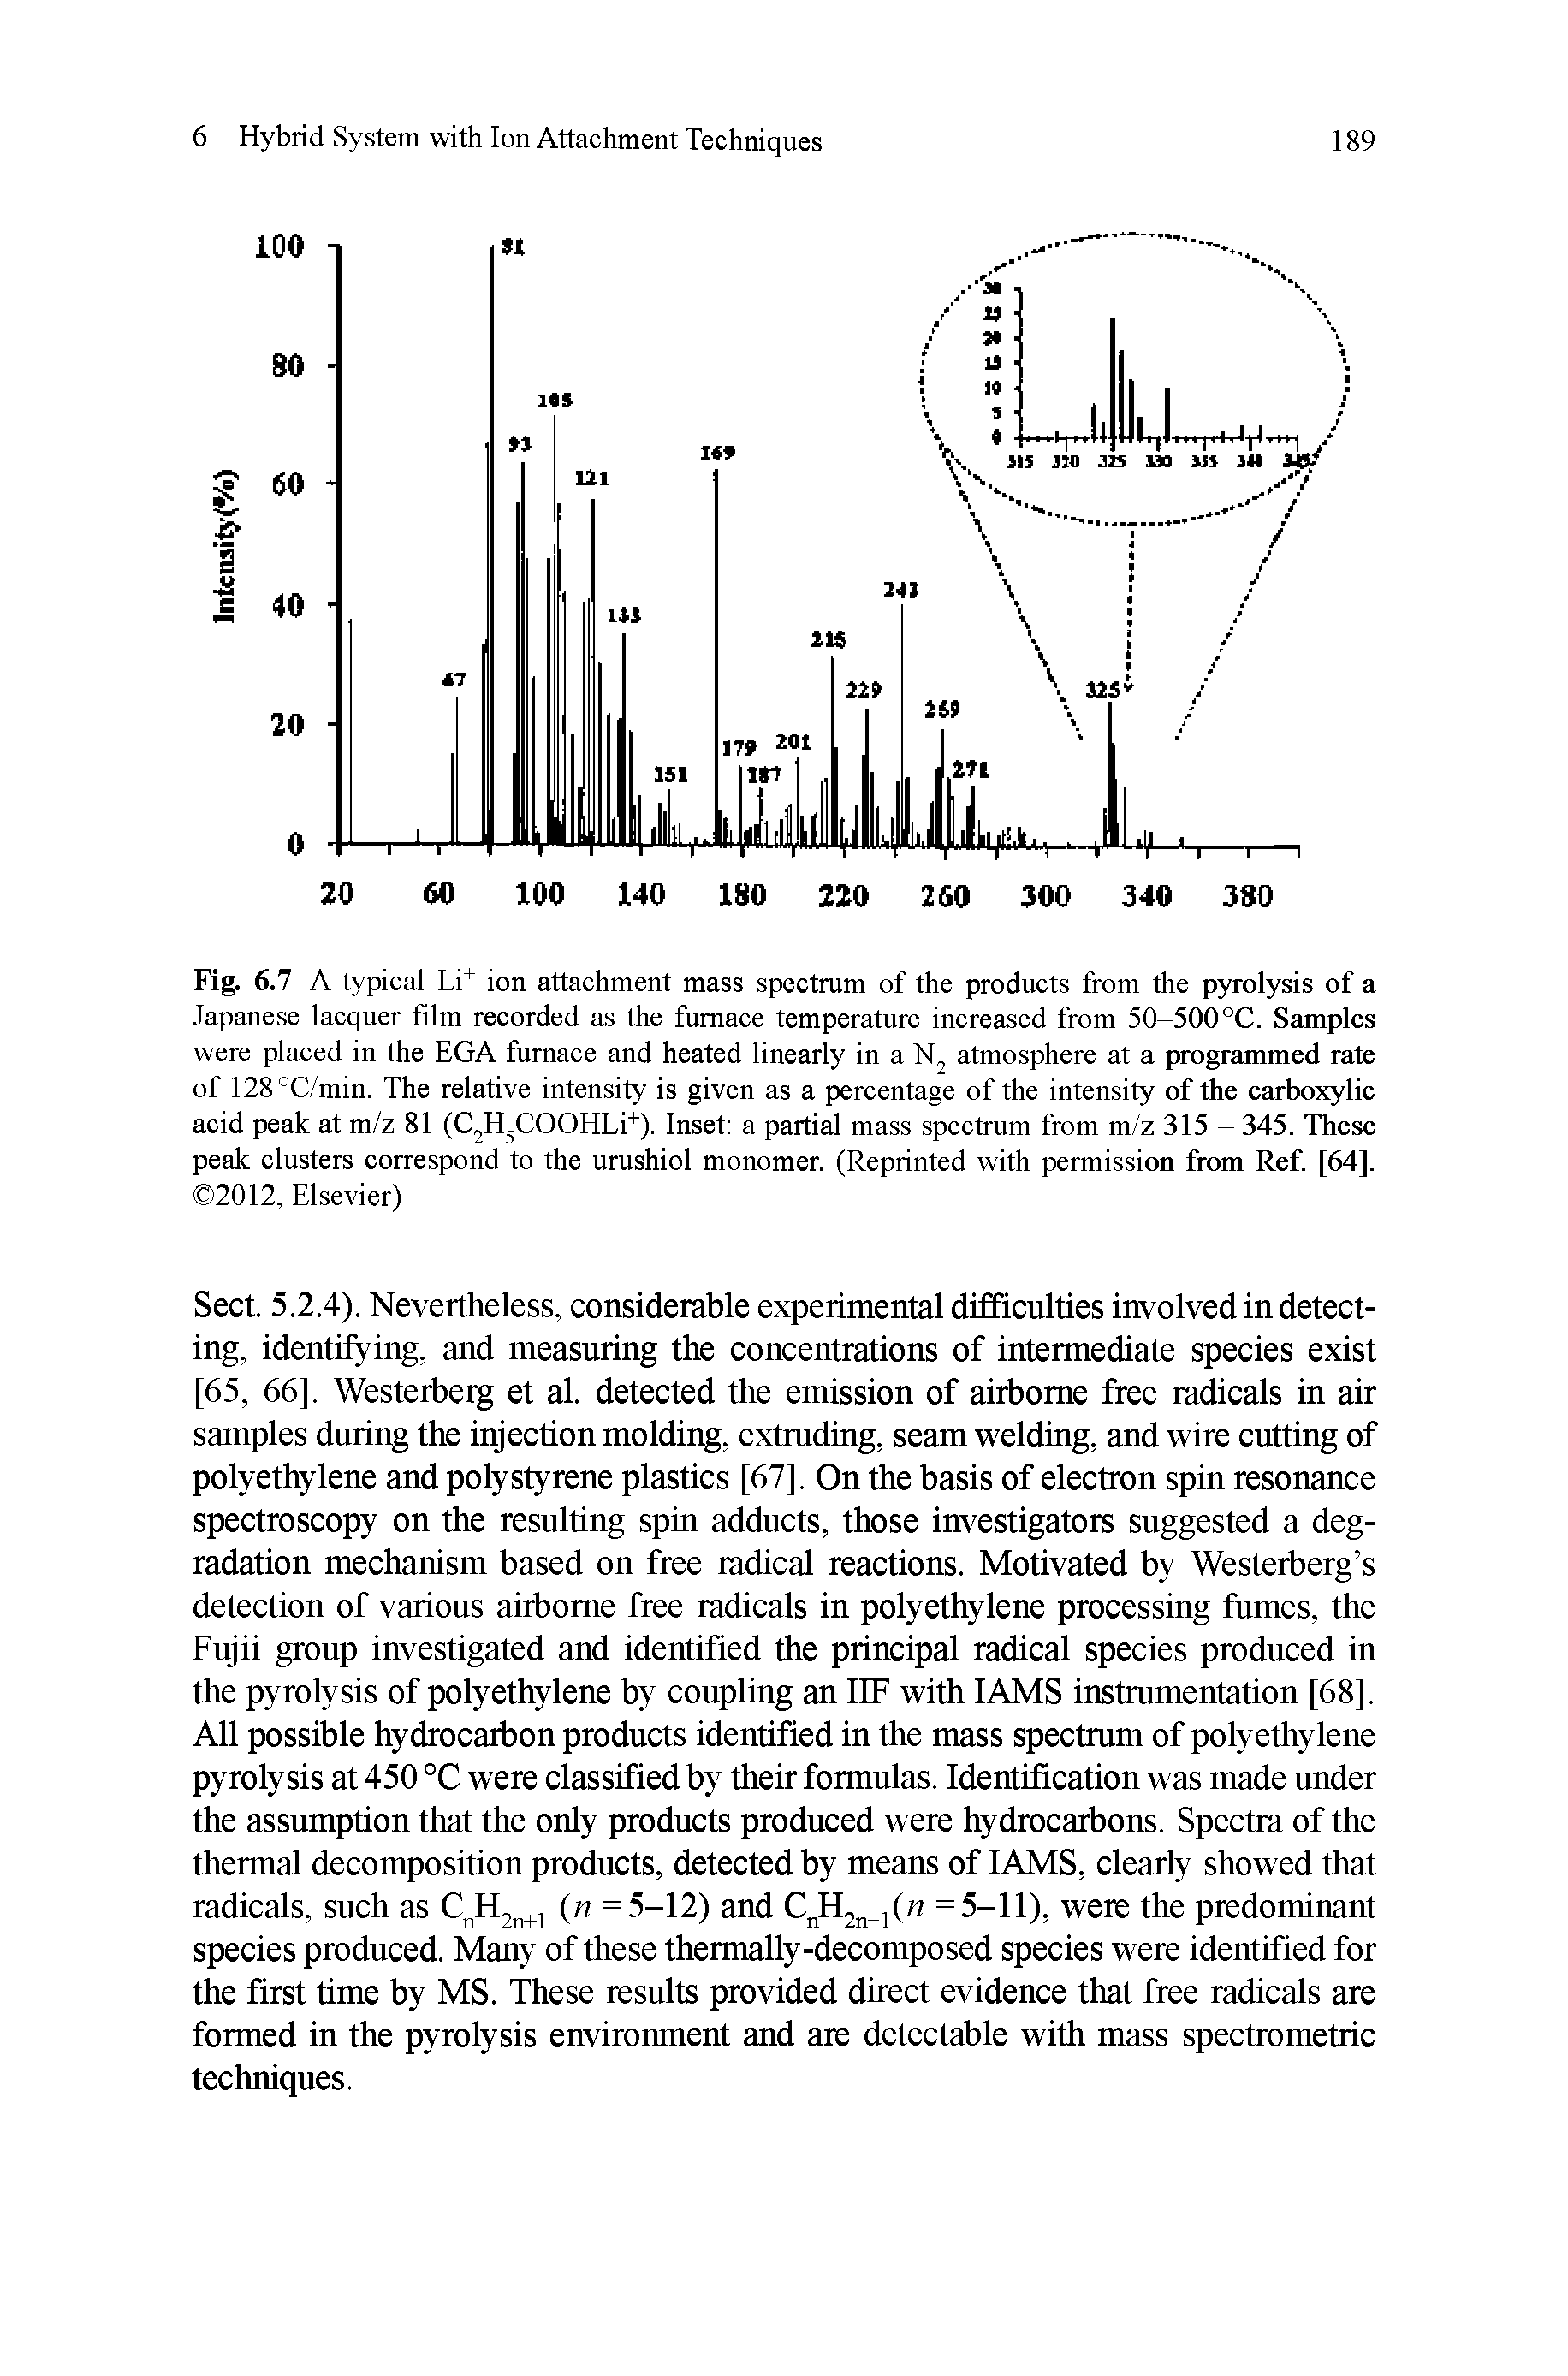 Fig. 6.7 A typical Li ion attachment mass spectrum of the products from the pyrolysis of a Japanese lacquer film recorded as the furnace temperature increased from 50-500 °C. Samples were placed in the EGA furnace and heated linearly in a atmosphere at a programmed rate of 128°C/min. The relative intensity is given as a percentage of the intensity of the carboxylic acid peak at m/z 81 (C HjCOOHLi ). Inset a partial mass spectrum from m/z 315 - 345. These peak clusters correspond to the urushiol monomer. (Reprinted with permission from Ref. [64]. 2012, Elsevier)...